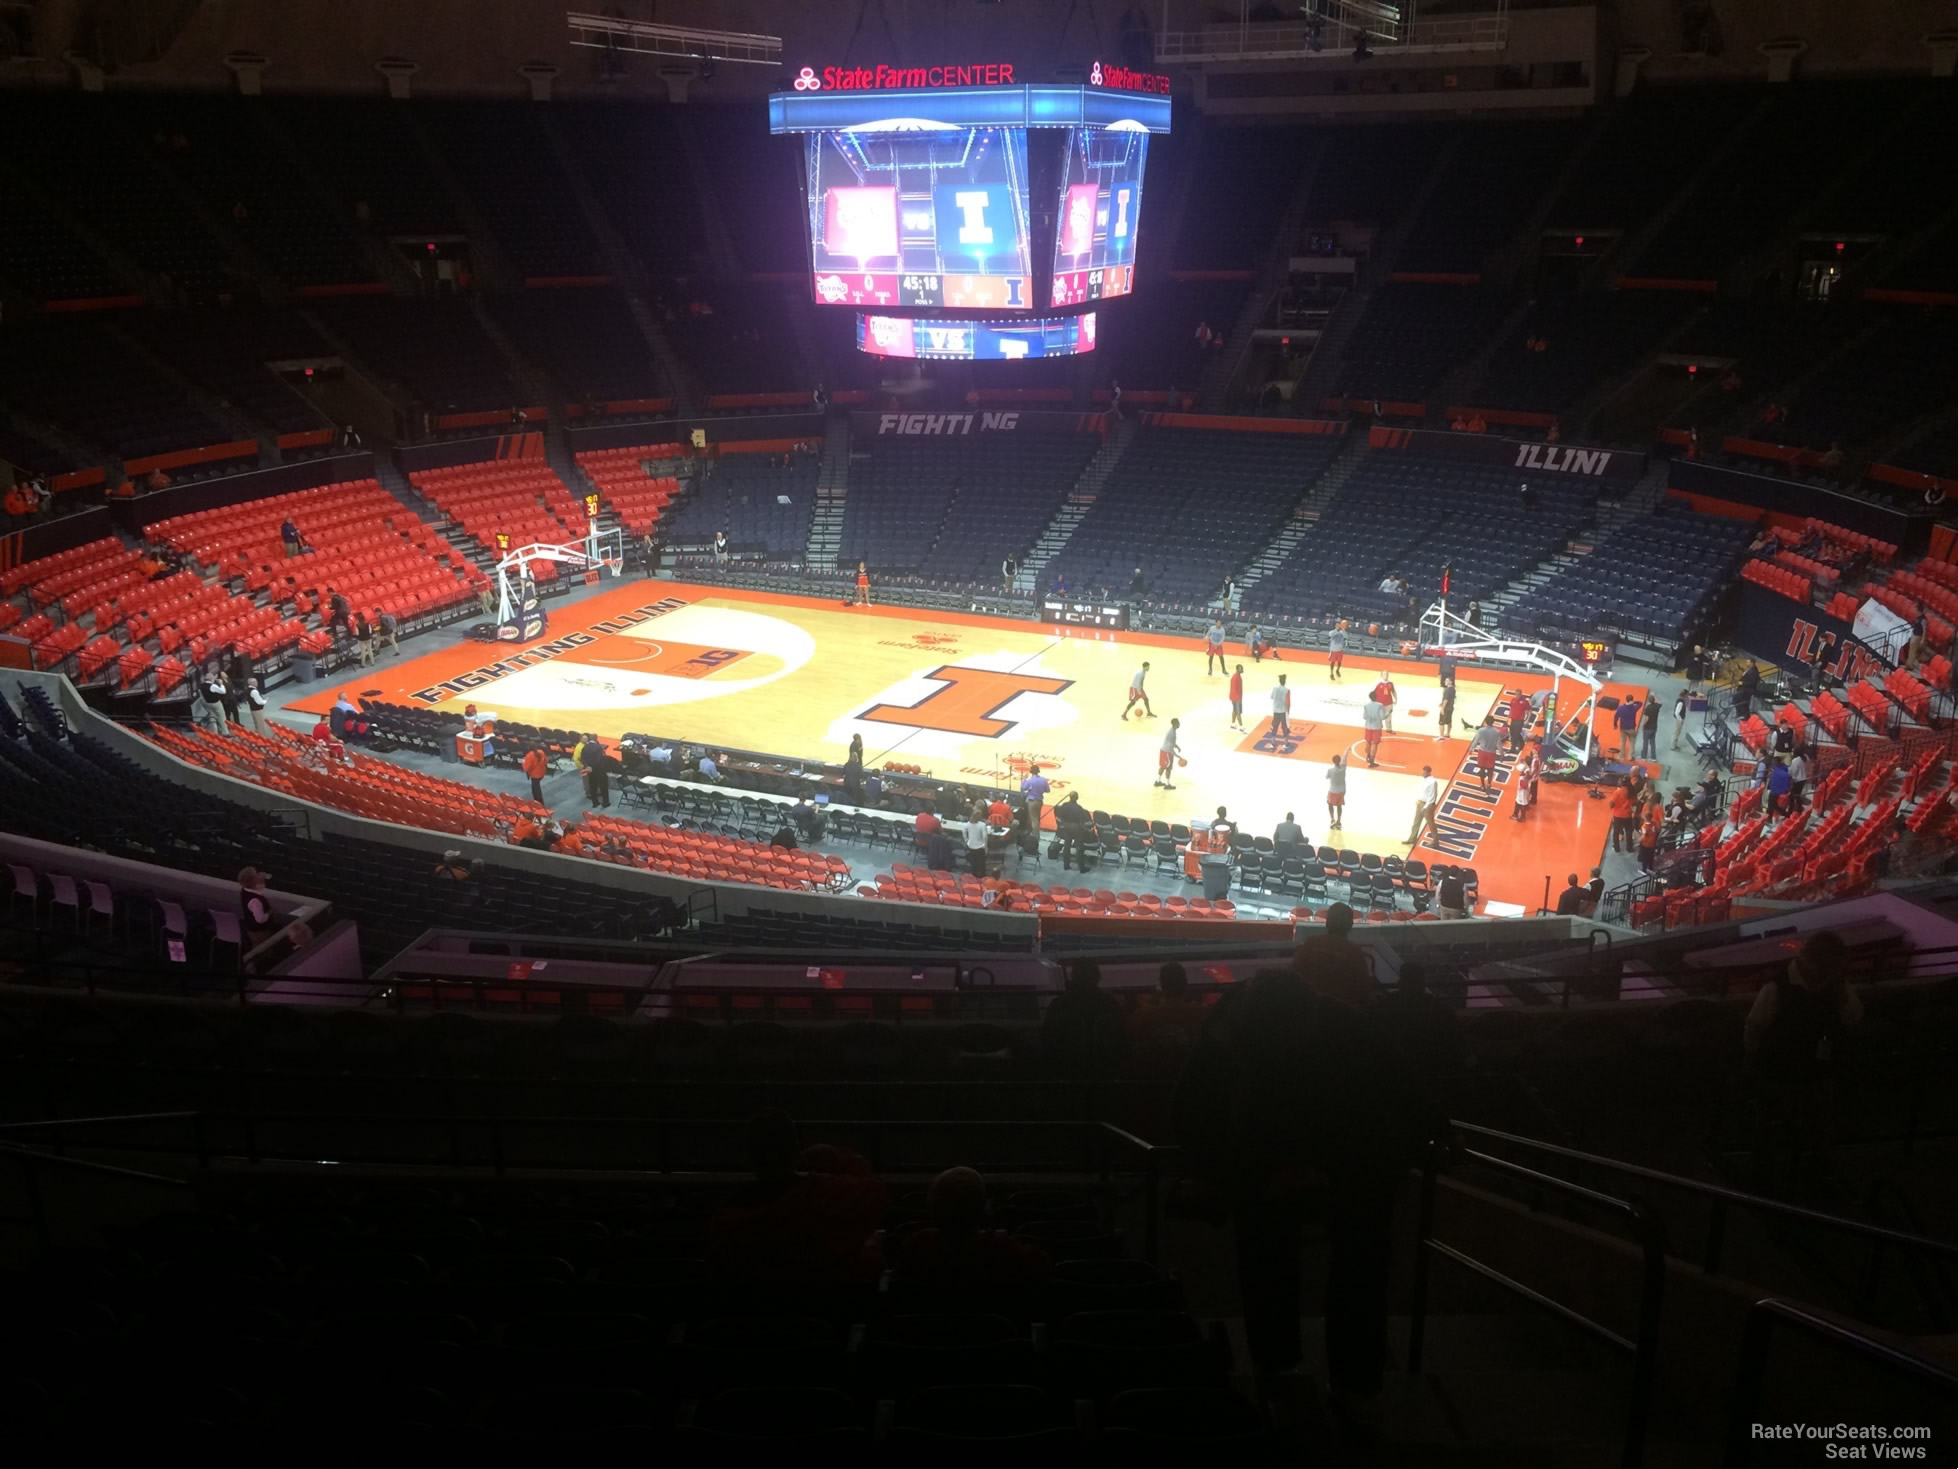 section 222, row 10 seat view  - state farm center